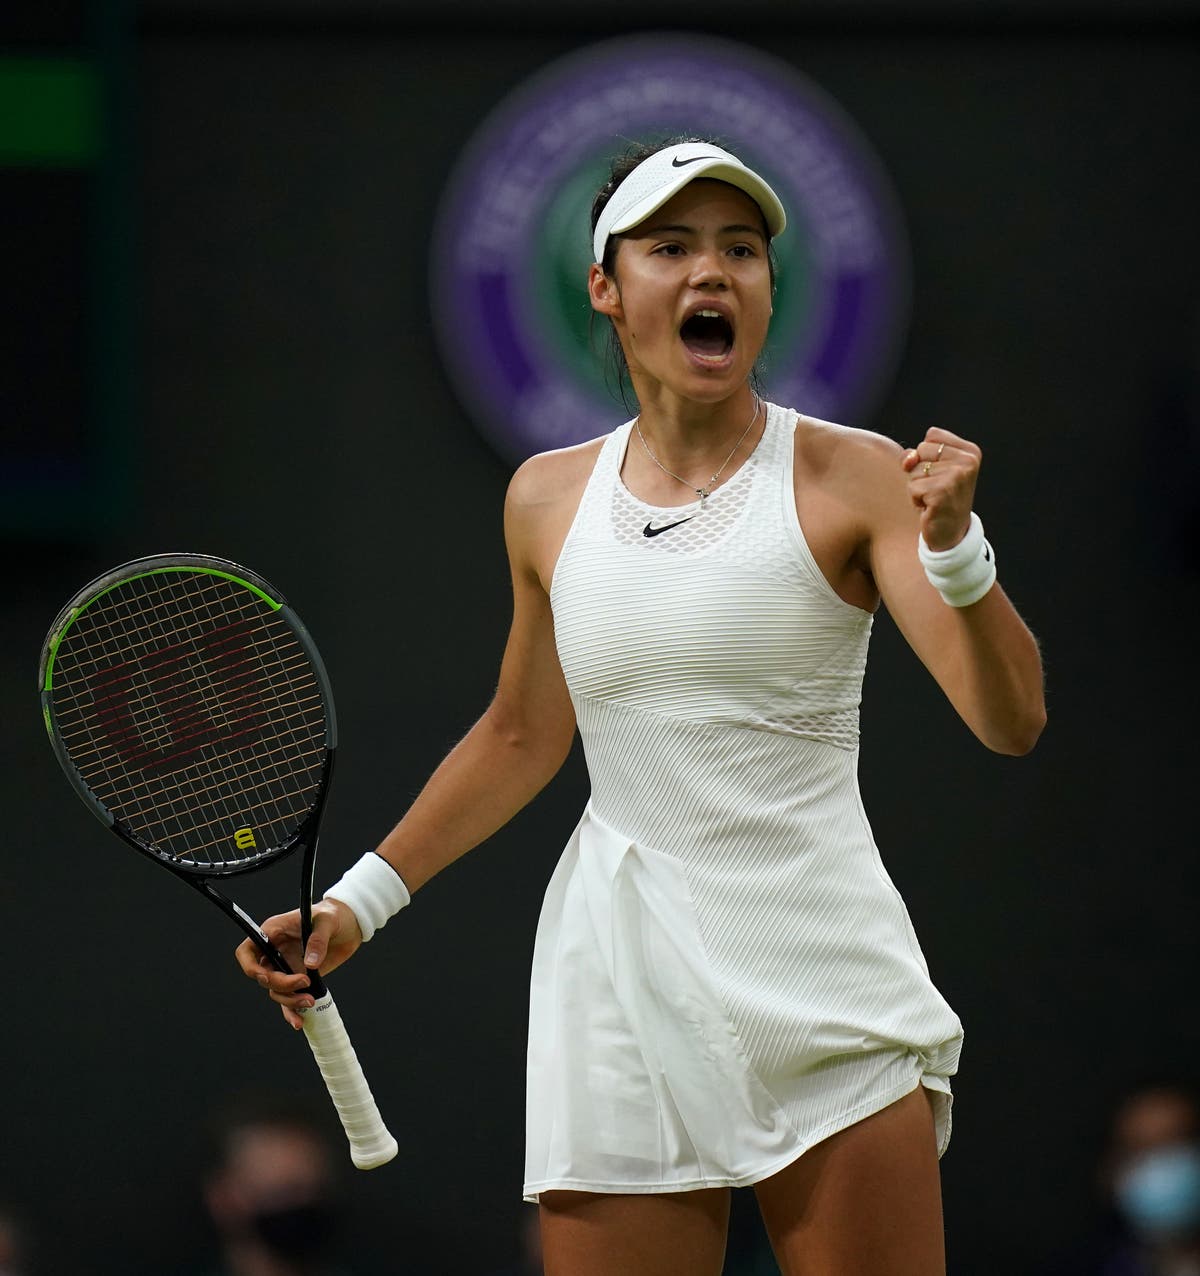 Emma Raducanu qualifies for US Open | The Independent